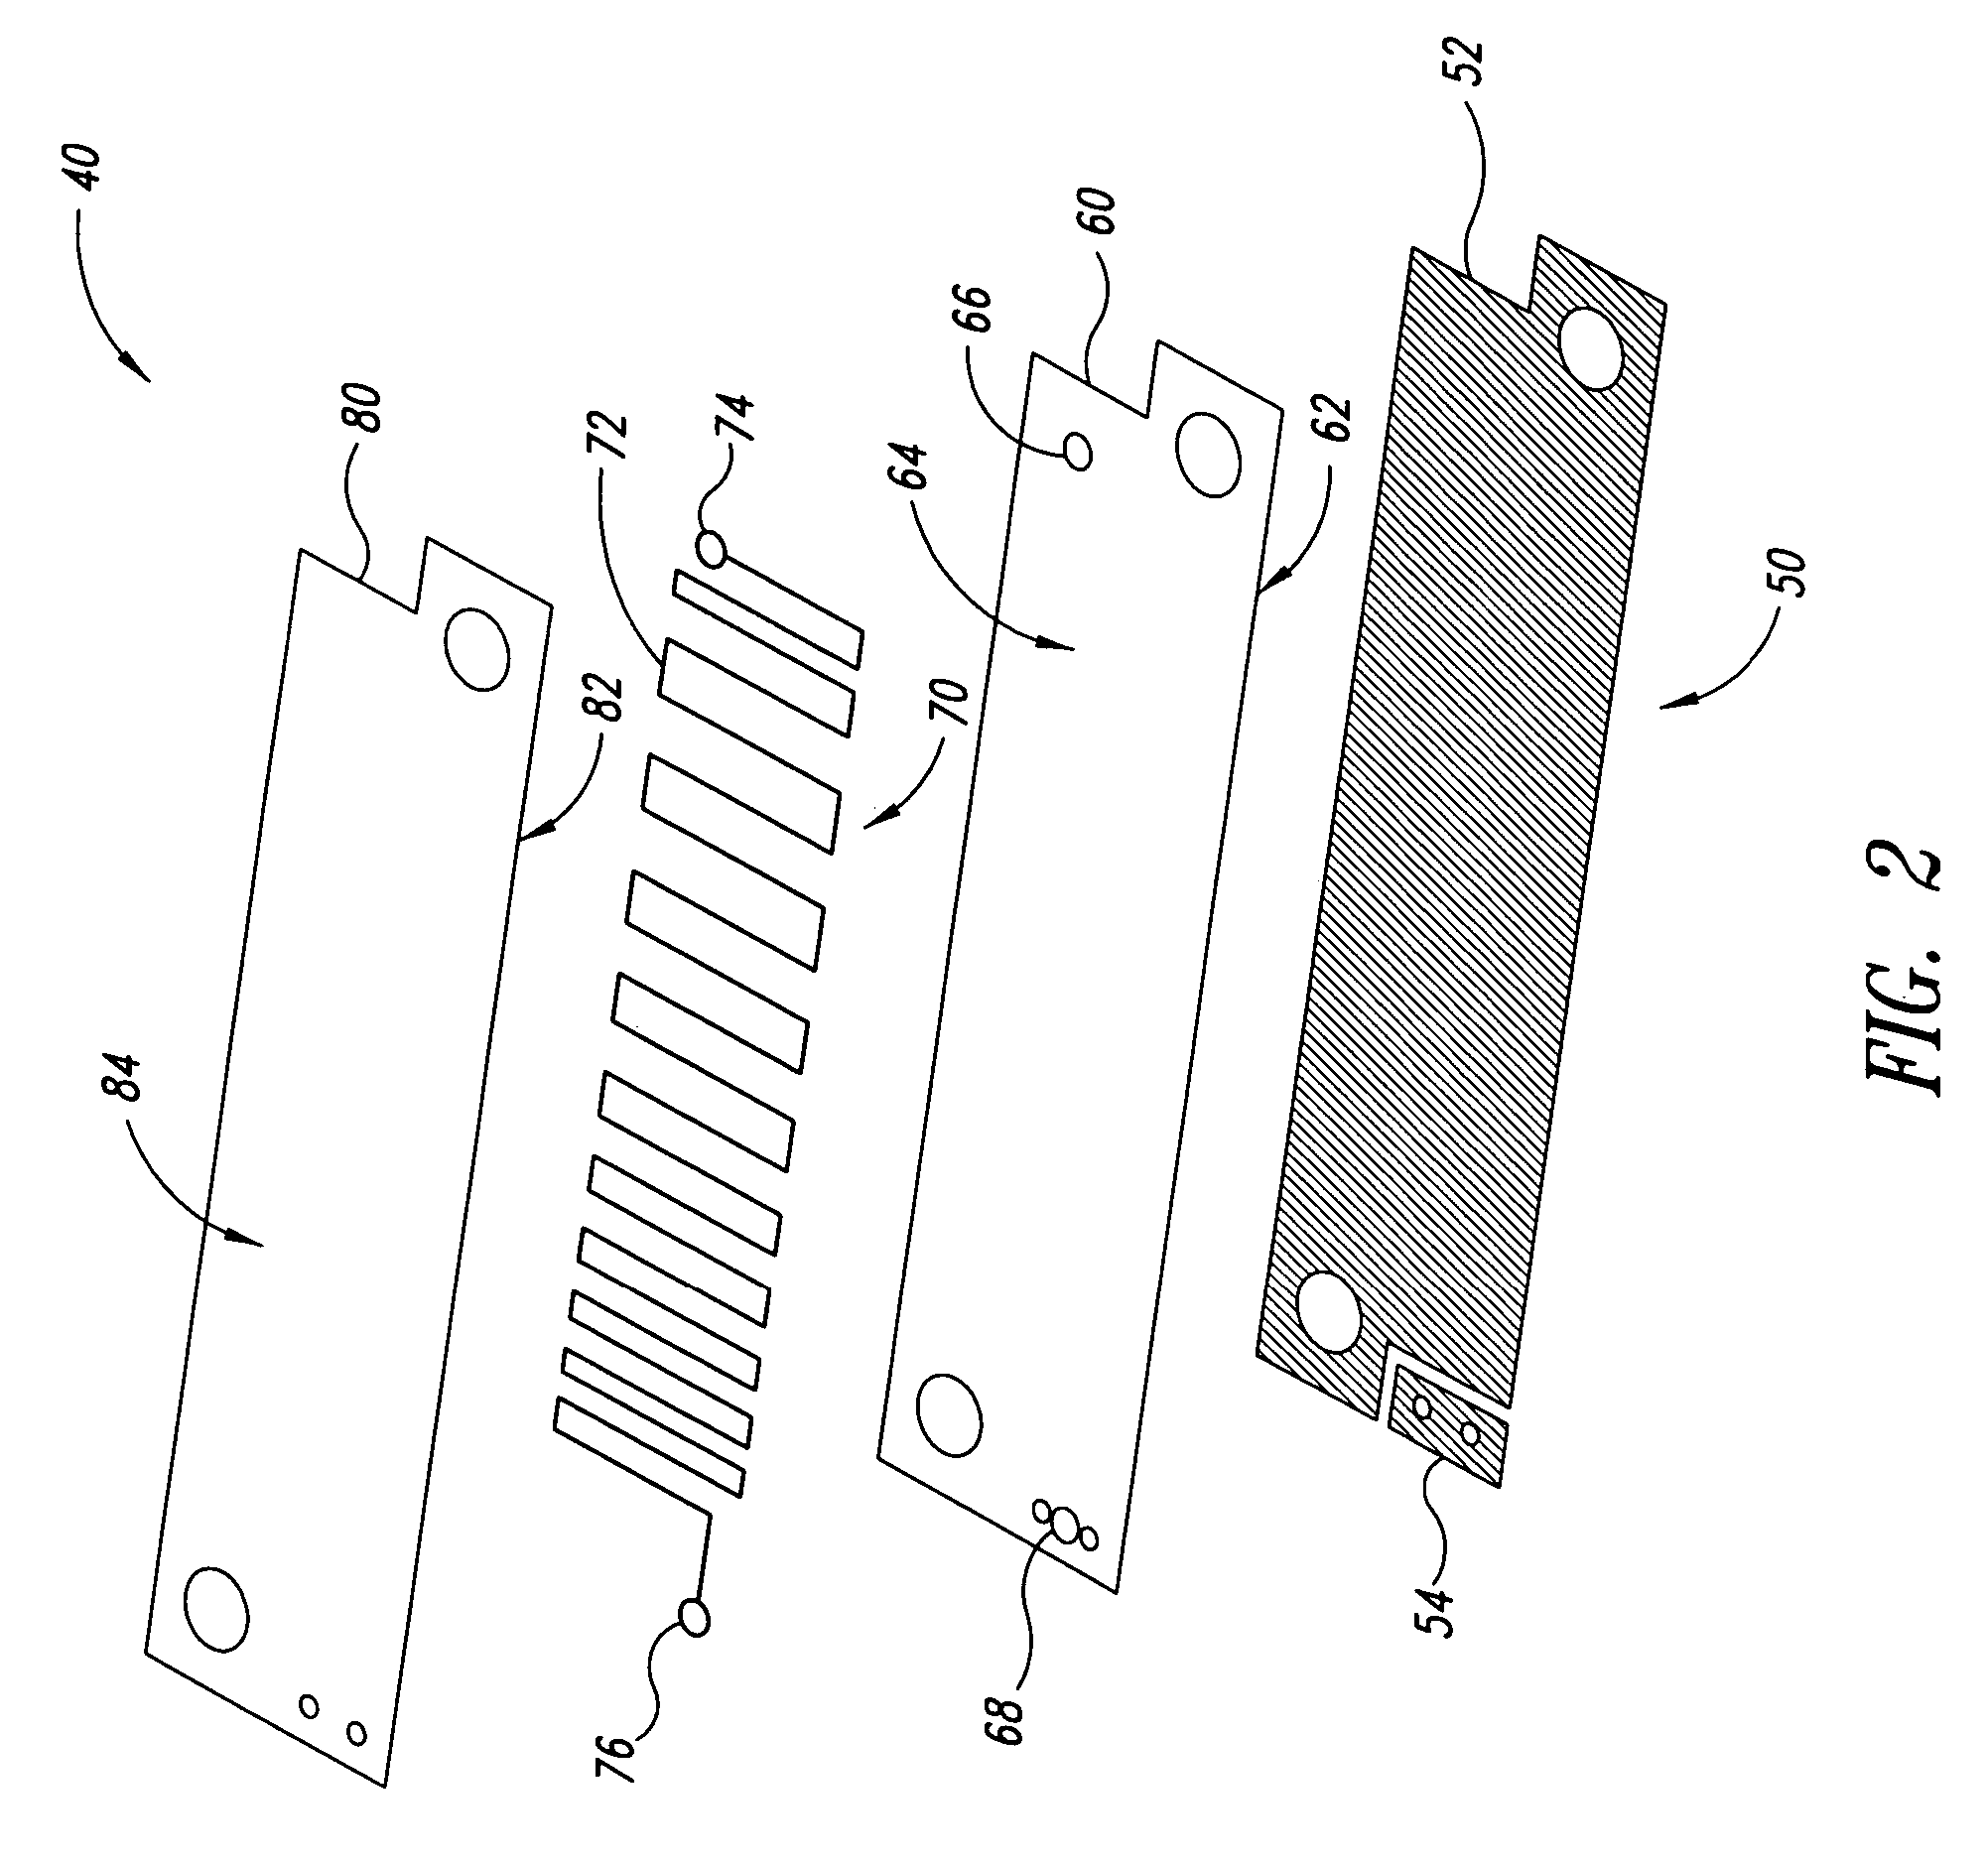 Integrated current collector and electrical component plate for a fuel cell stack